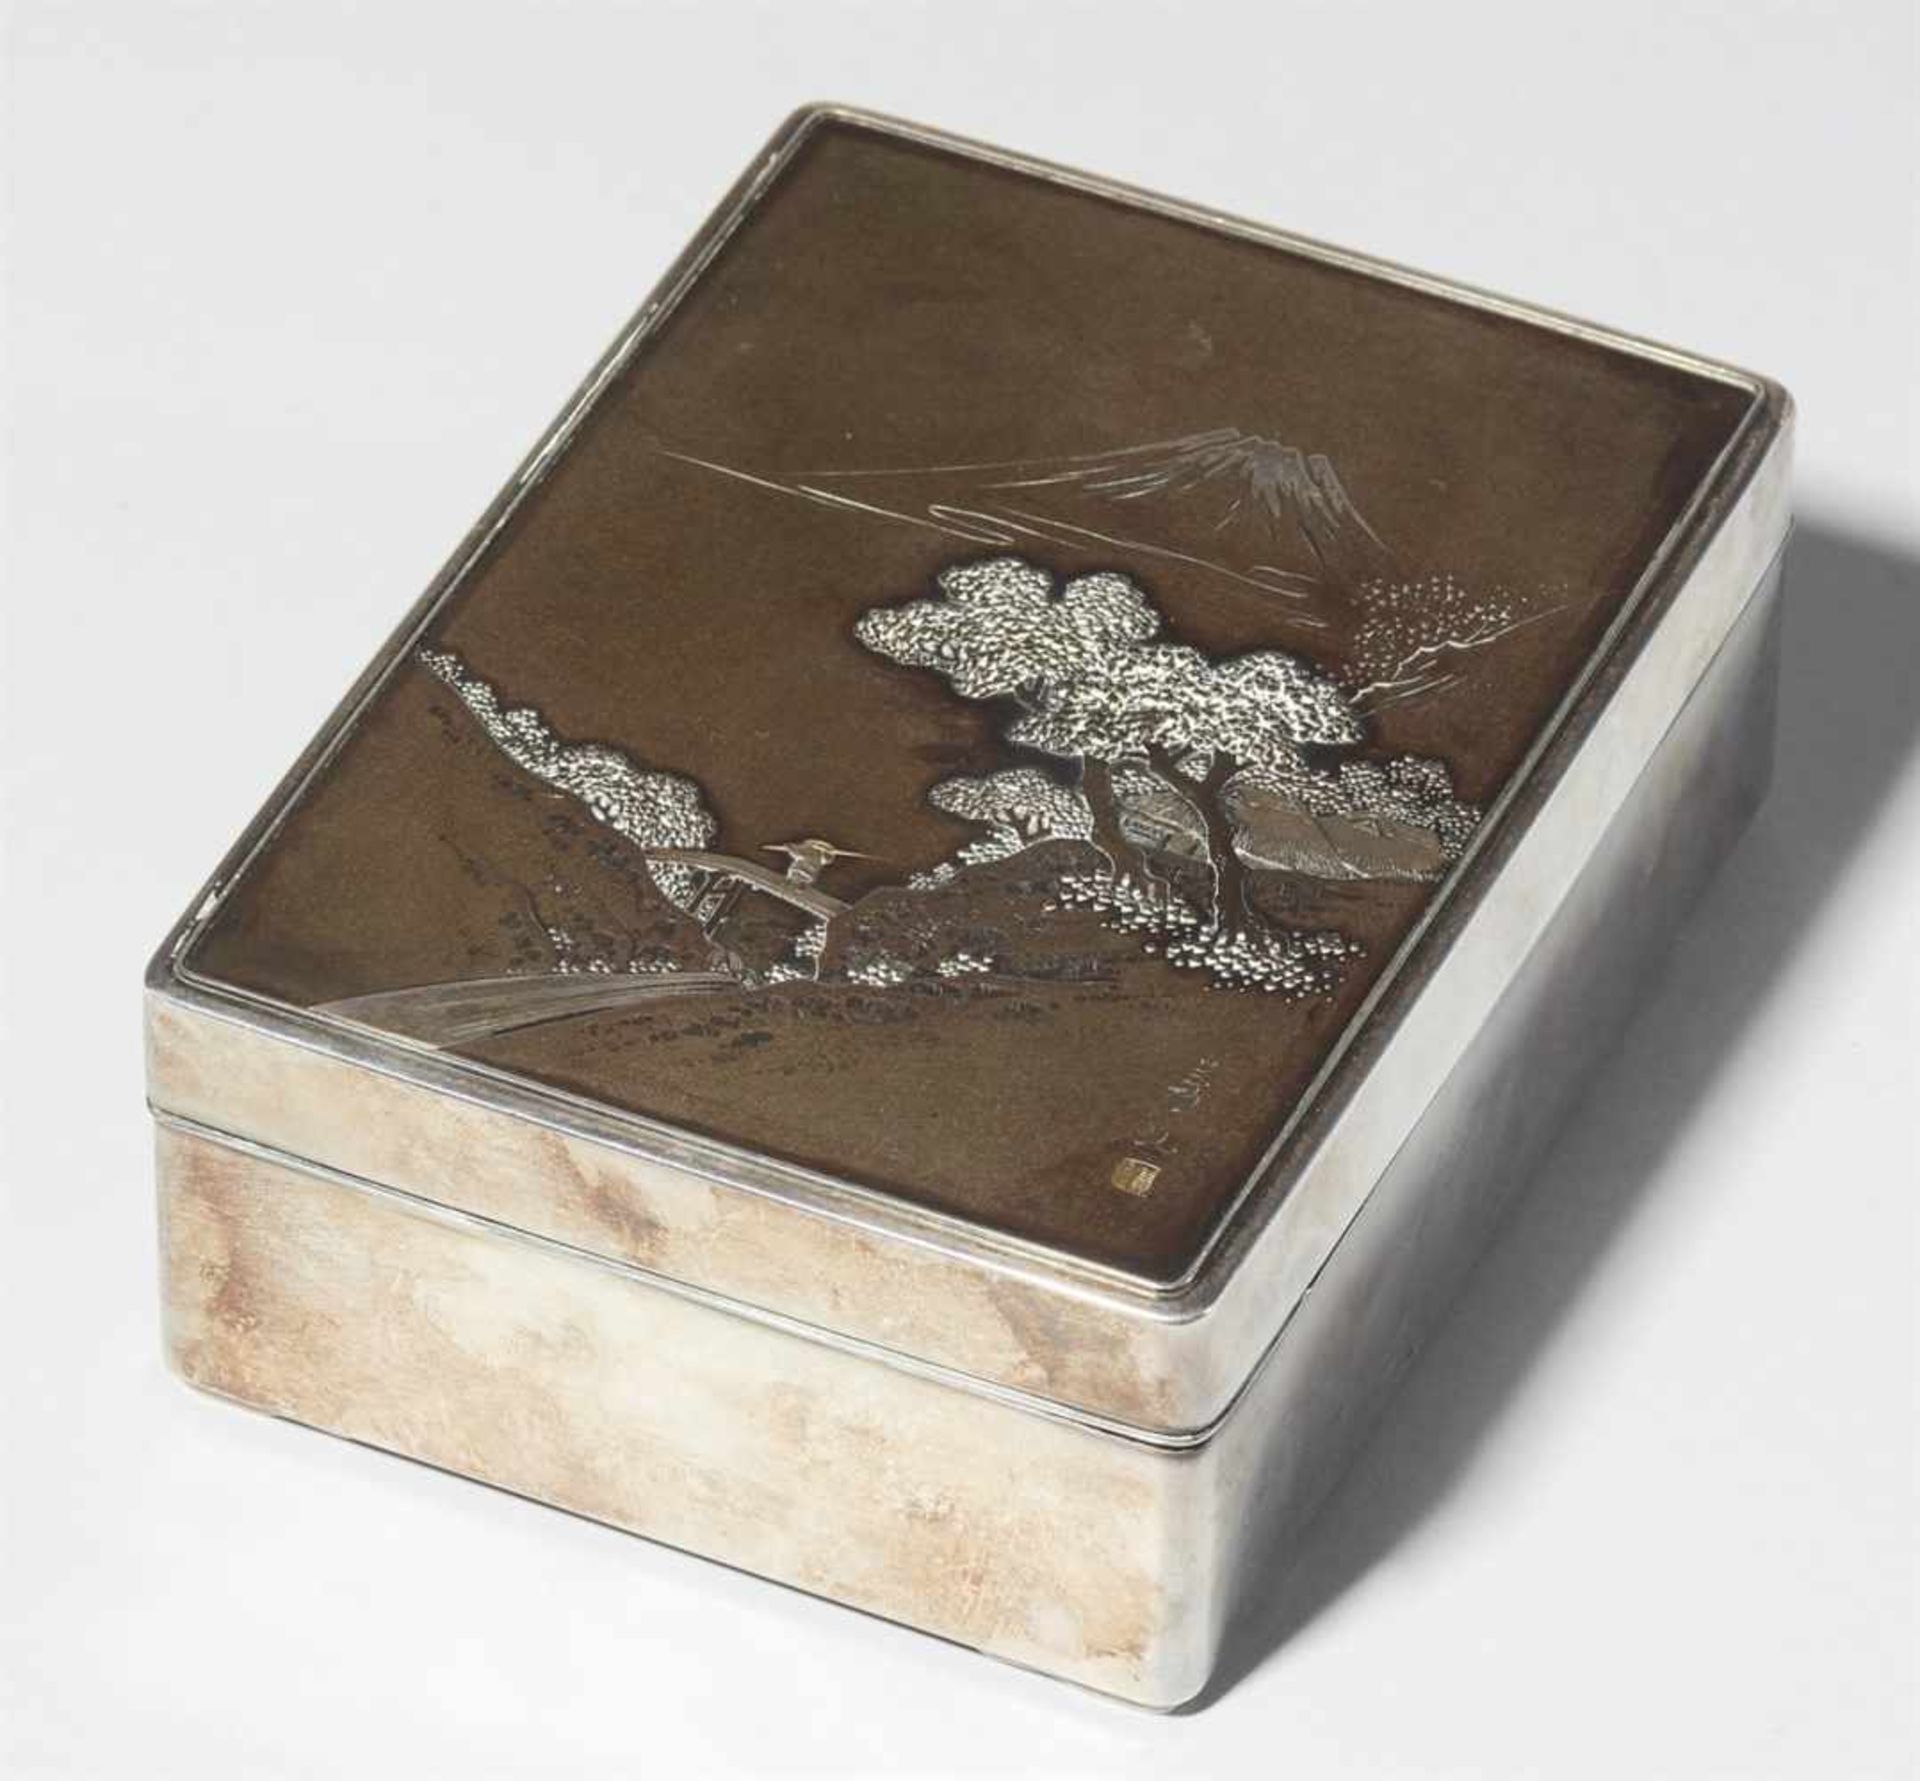 A silver and black-lacquered wood cigarette box. Around 1900